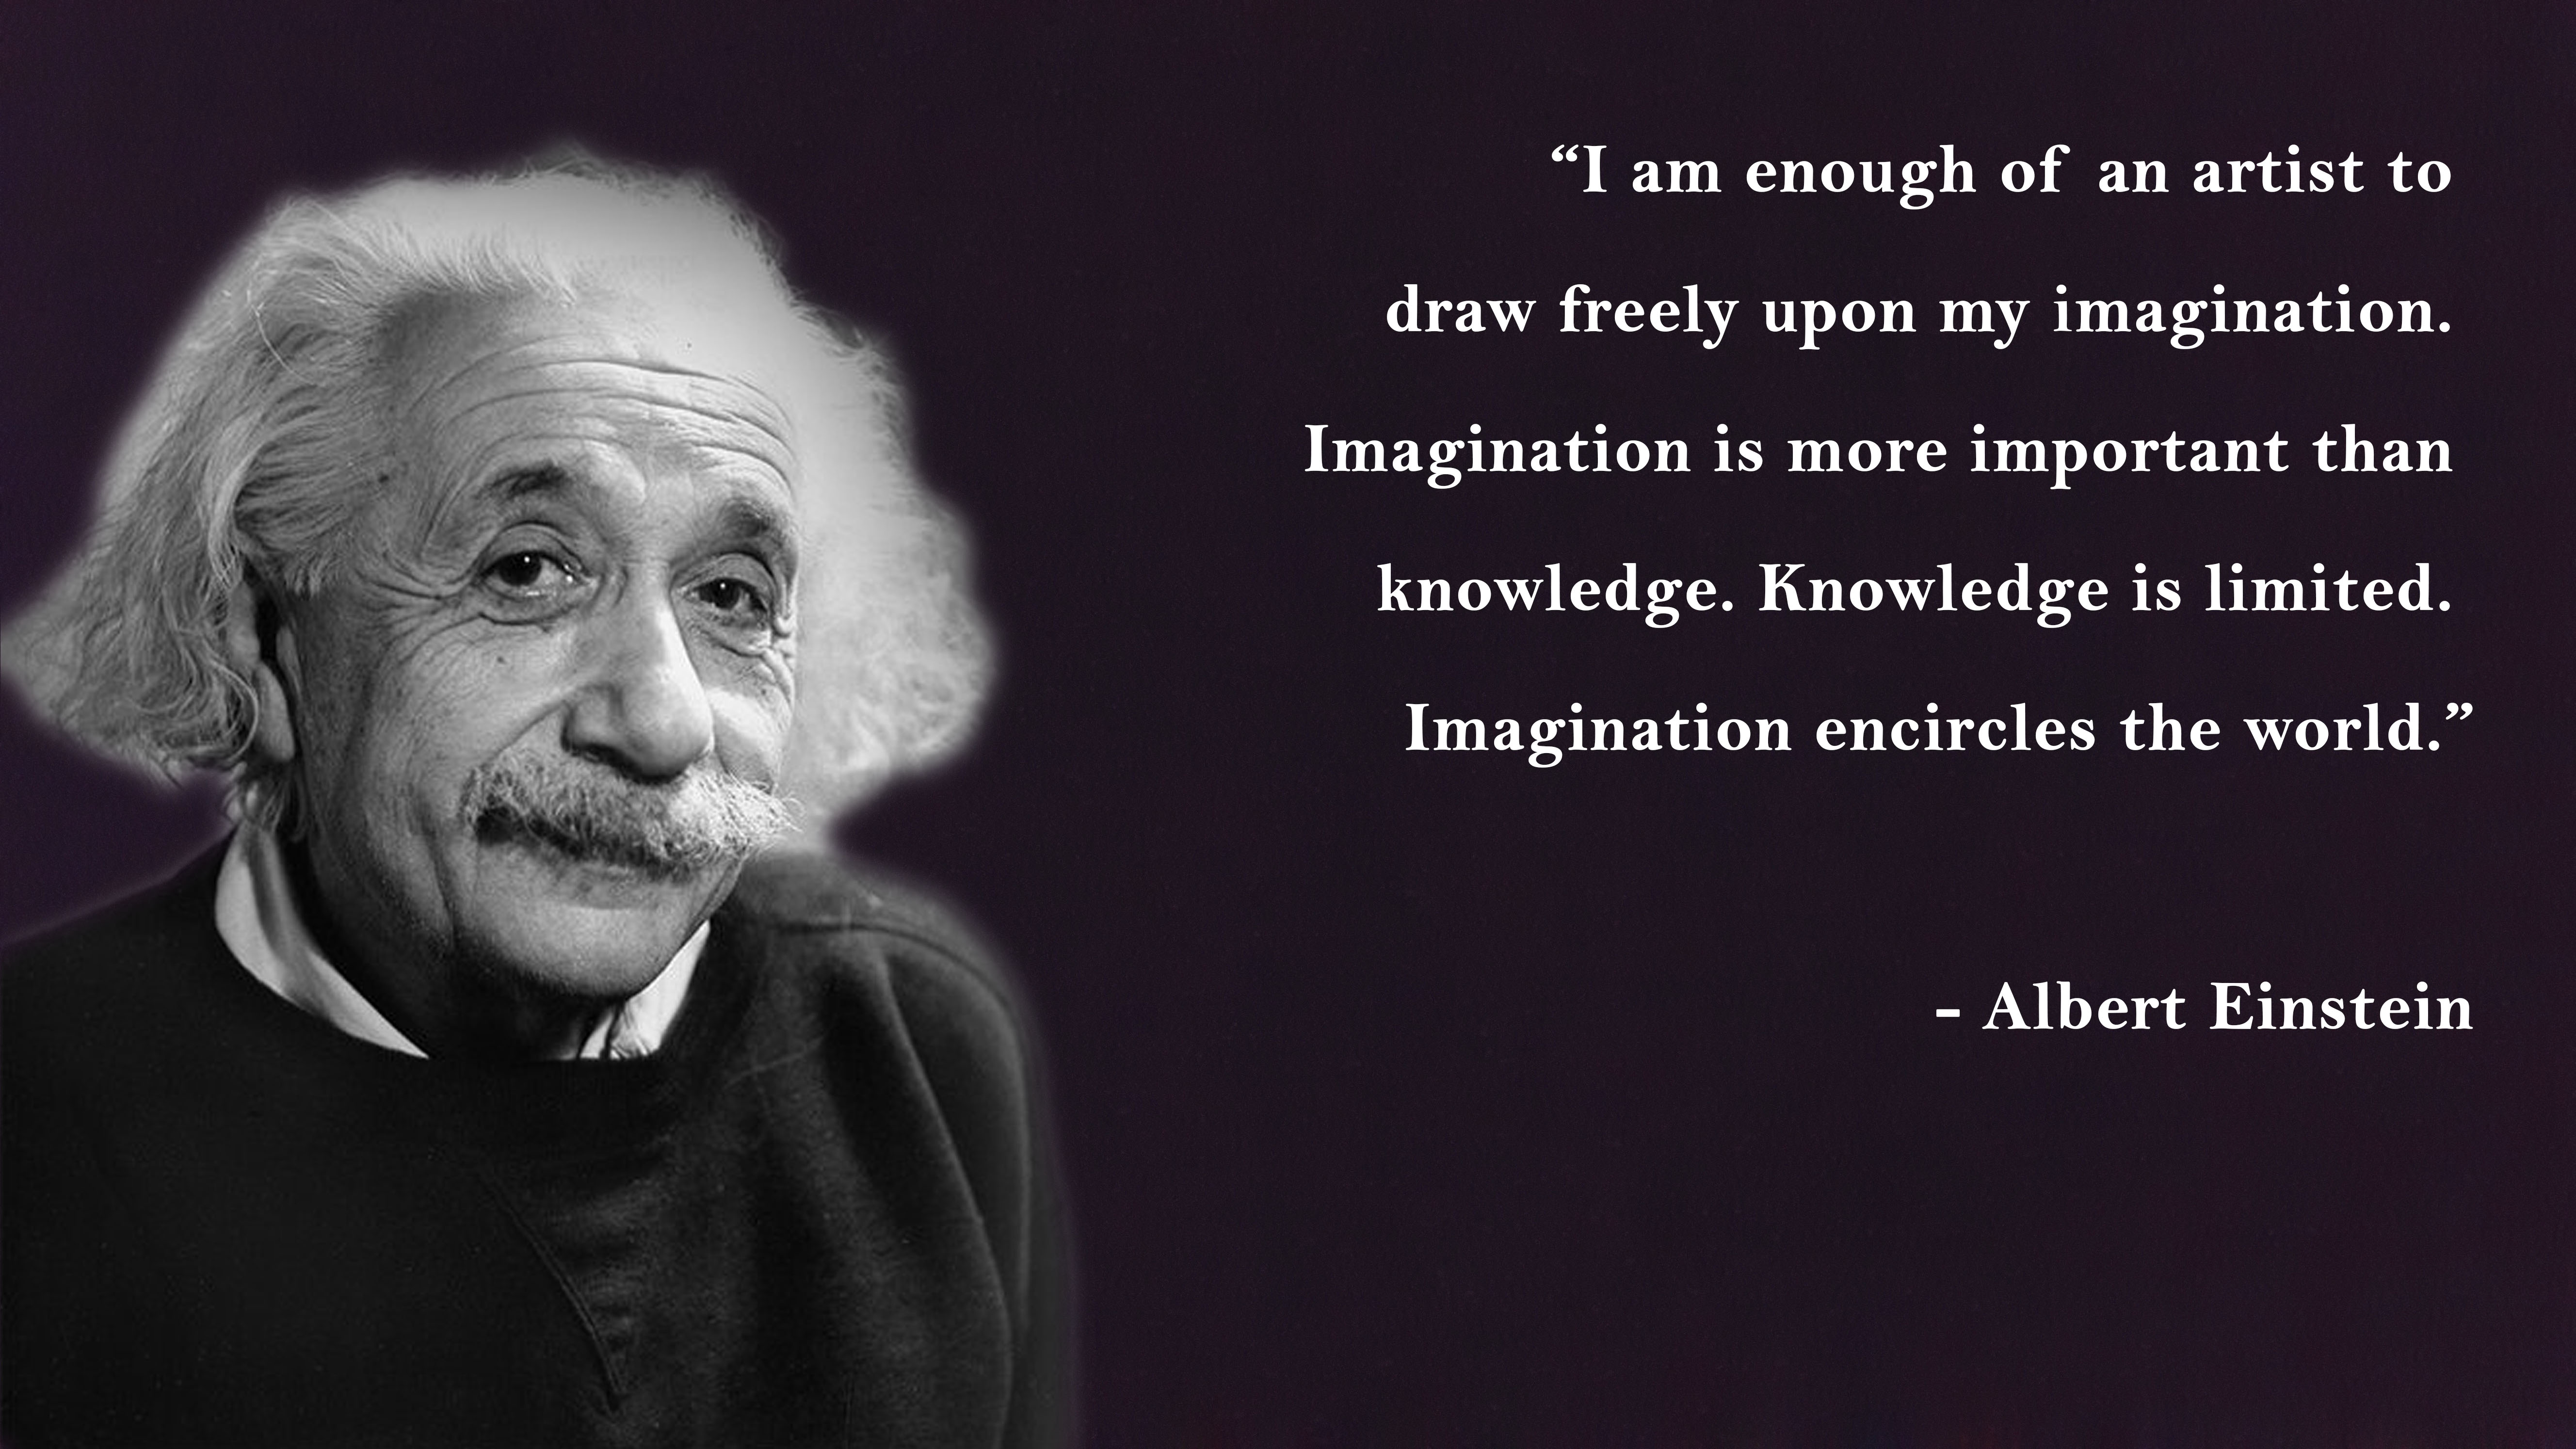 Imagination is more important than knowledge.jpg